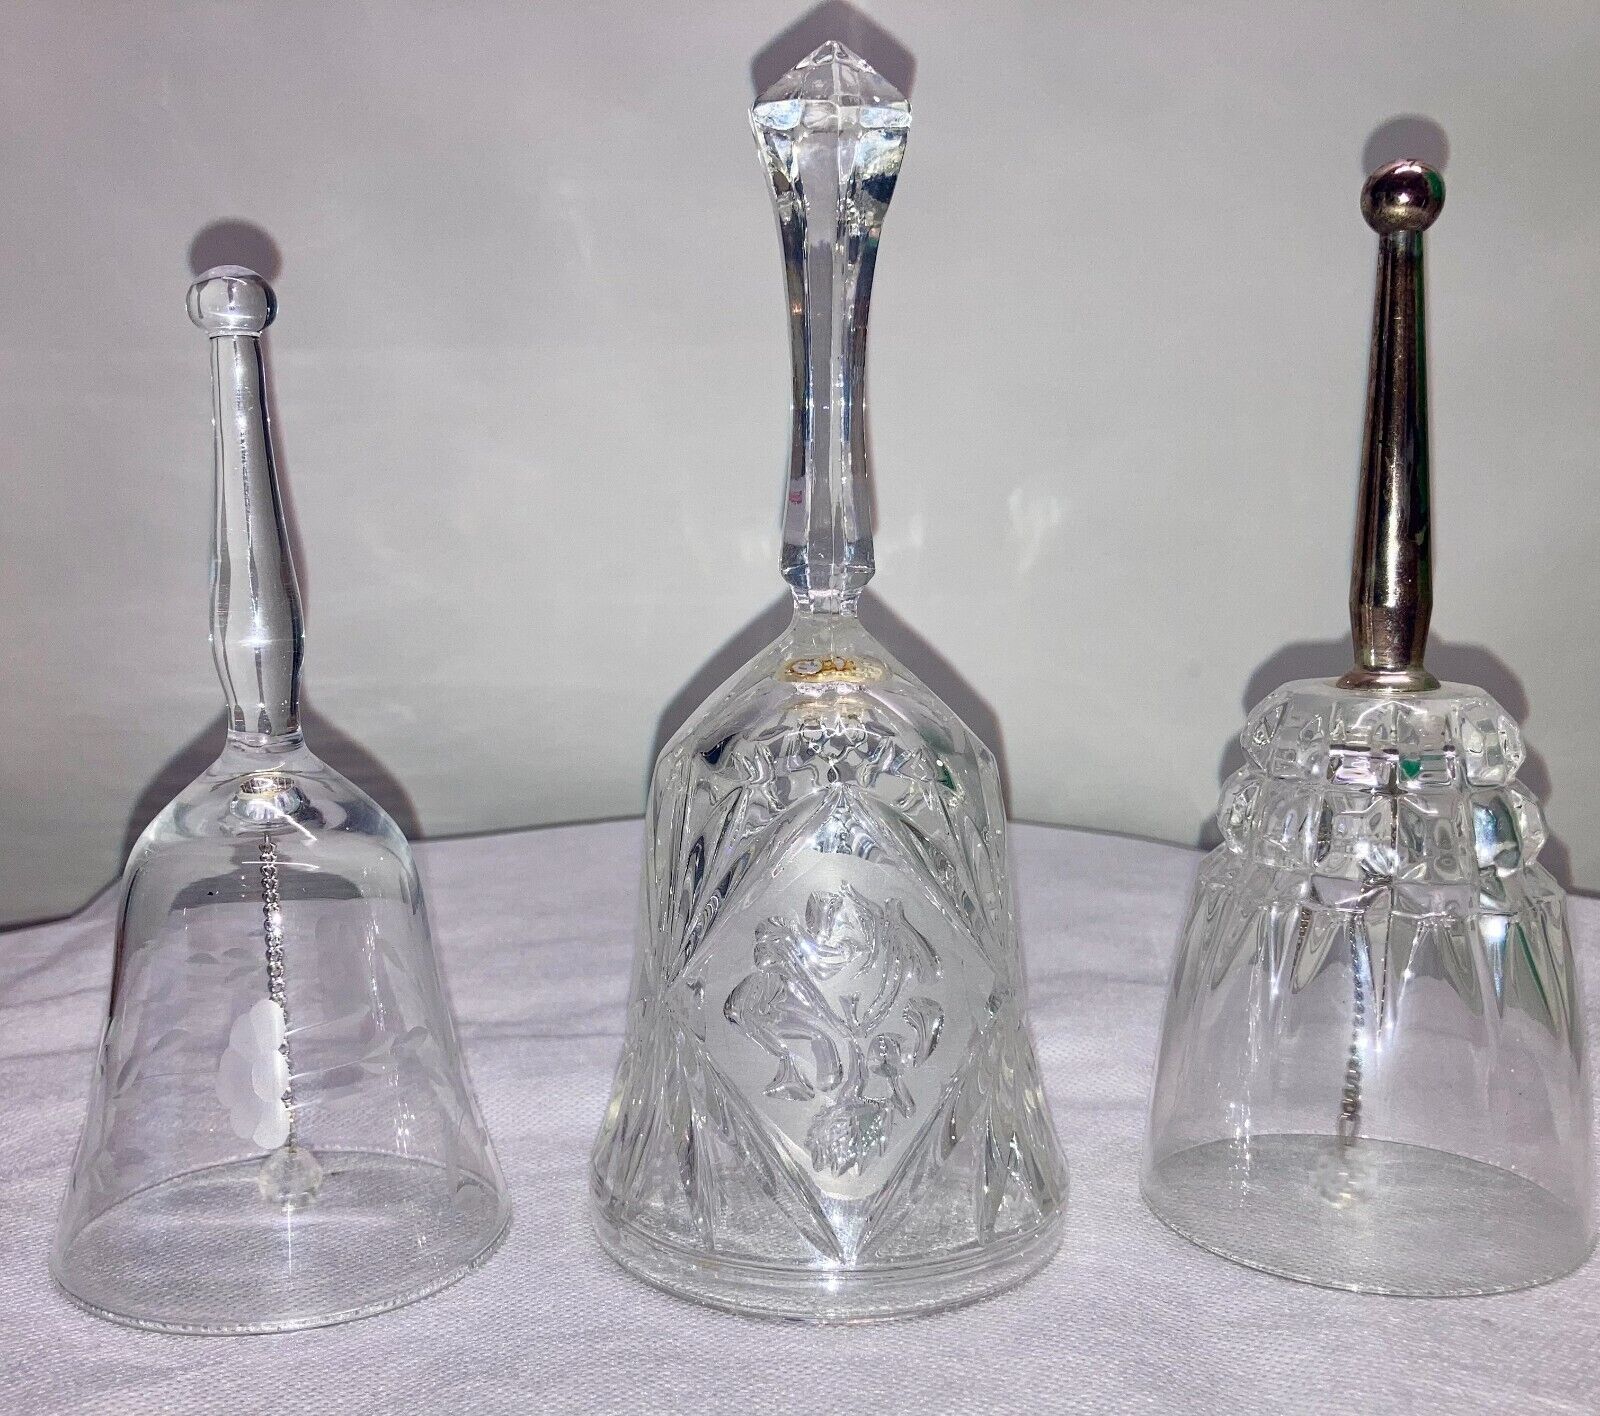 Lot of 3 Princess House Crystal Bells Etched Roses Floral Silver Plated Handle